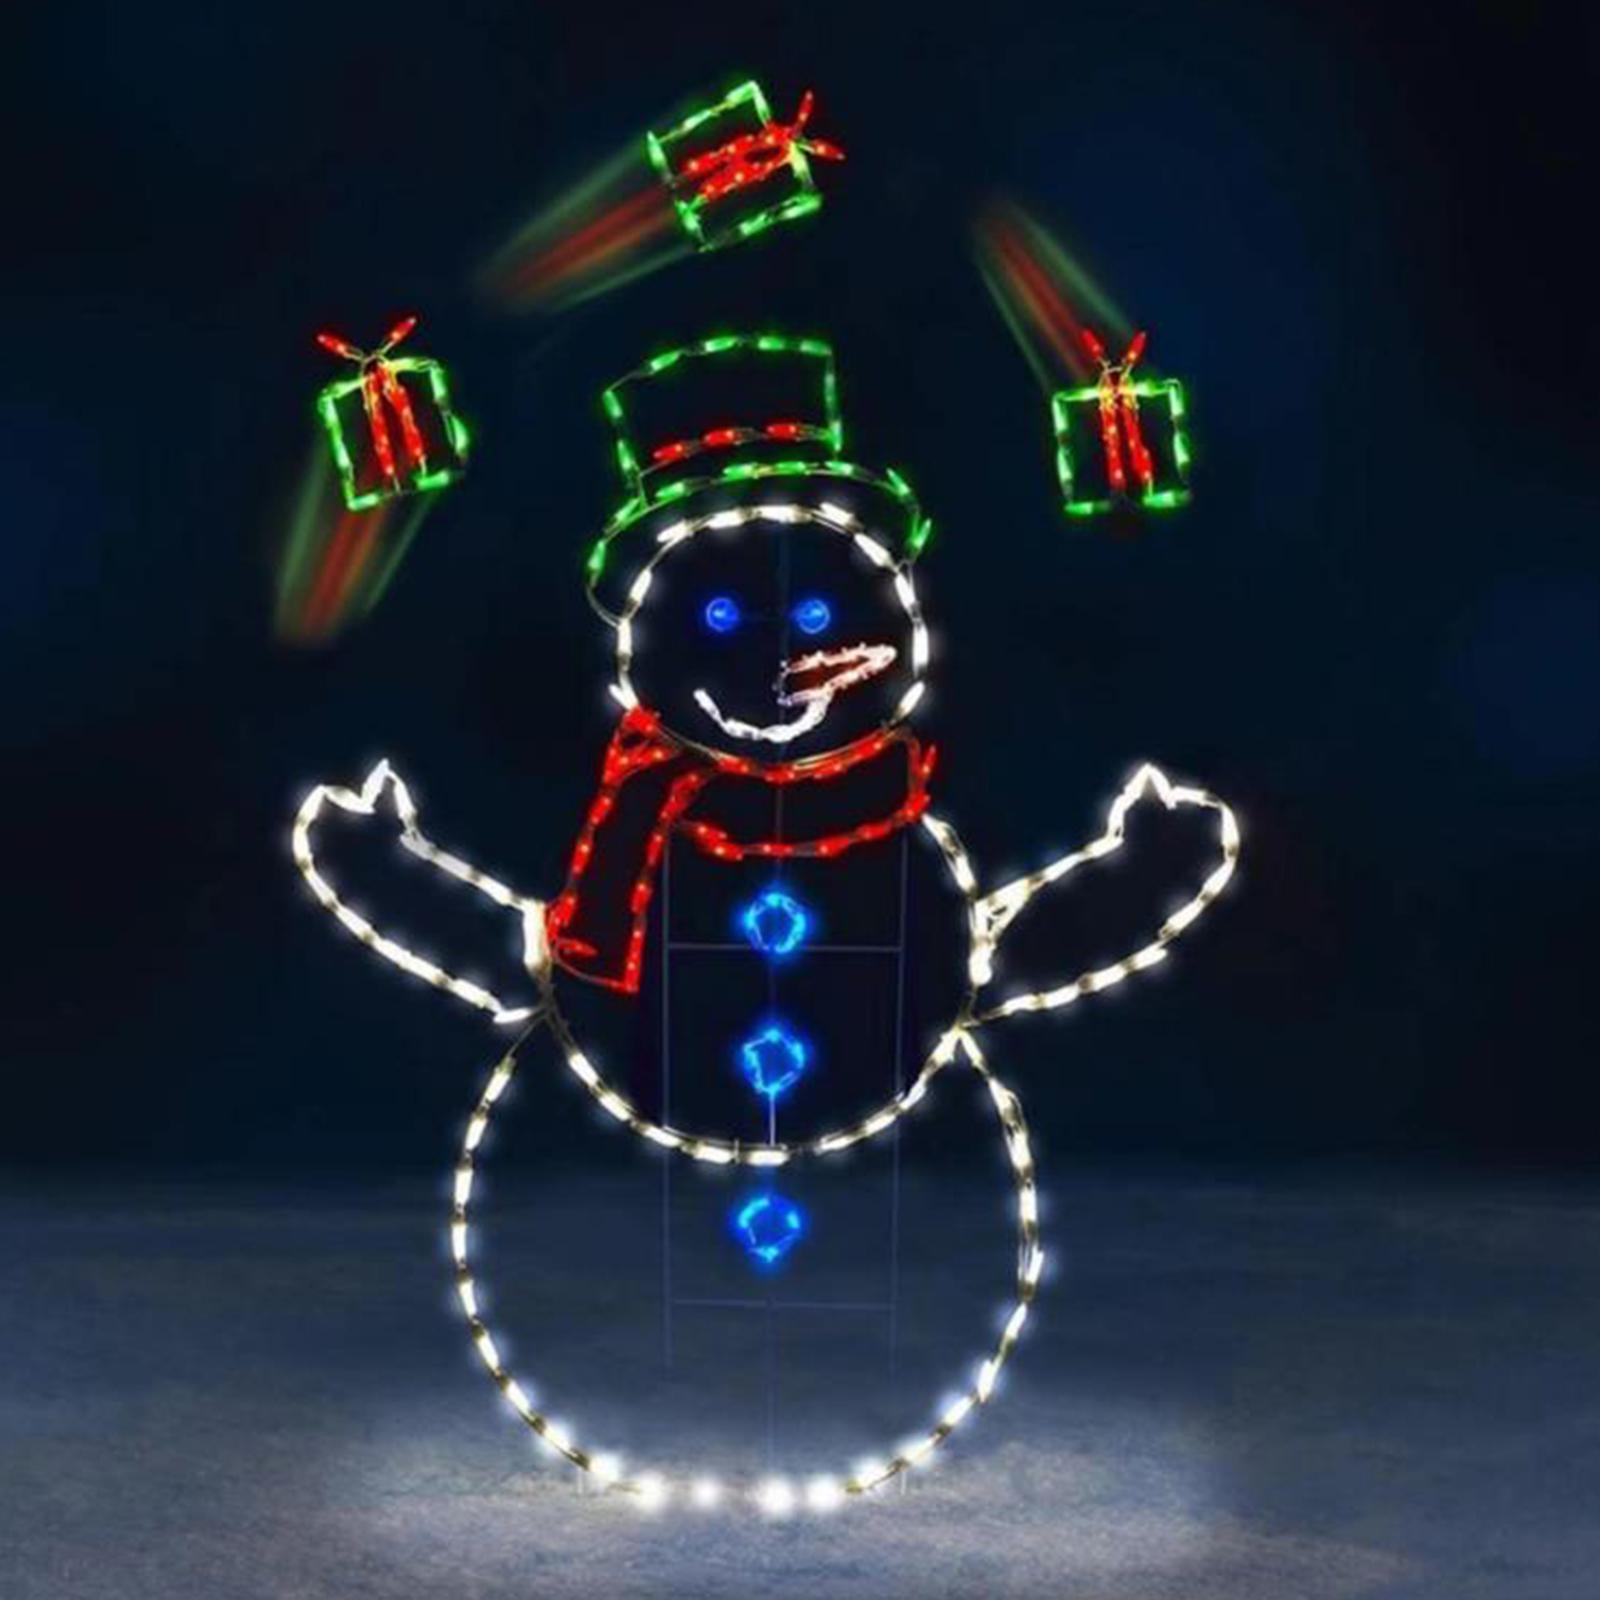 Christmas Lights Snowball Fight Decoration Ornament for Christmas Tree